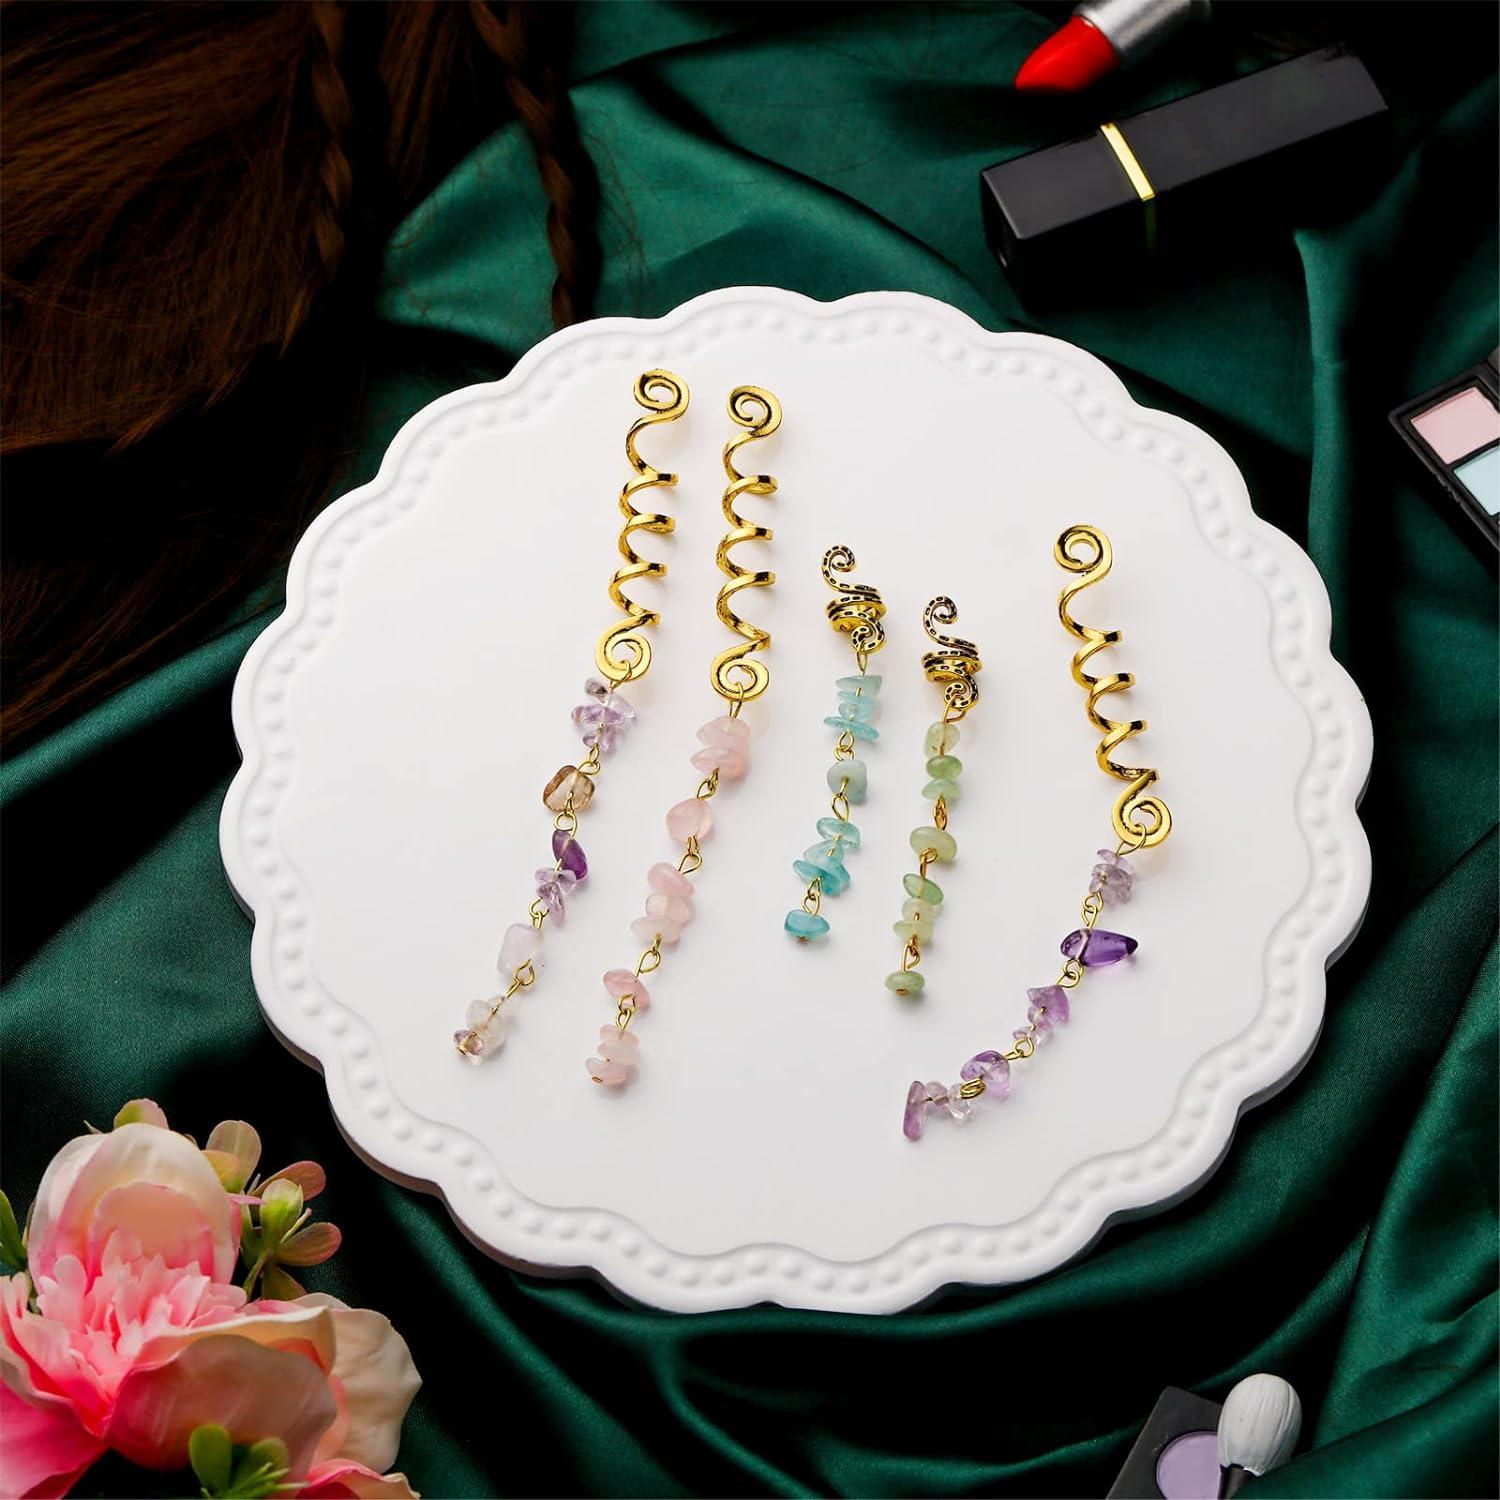 12 Pieces Colored Natural Stone Pendant Hair Jewelry for Braids Crystal  Dreadlock Accessories Hair Gems Metal